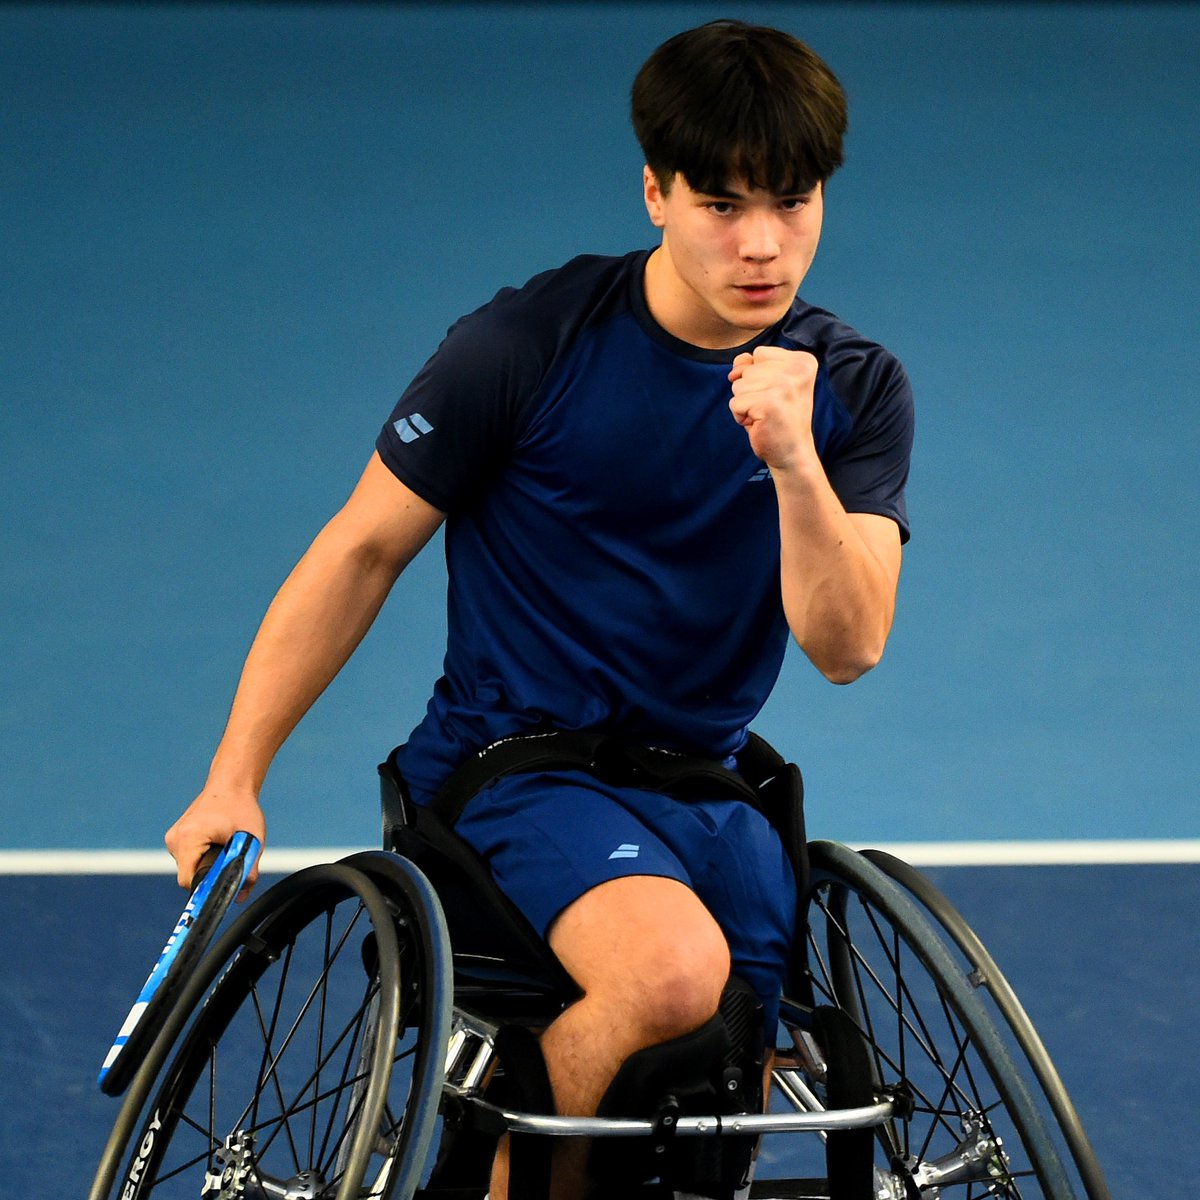 💪 2 from 2 for 🇬🇧 Juniors 💪 @DahnonW @BenBartram3 win singles 2-0 to give Great Britain an unassailable lead against the Netherlands at the World Team Cup More on Day 3 in Sardinia 👉 bit.ly/GBWTC2021 #BackTheBrits 🇬🇧 #wheelchairtennis